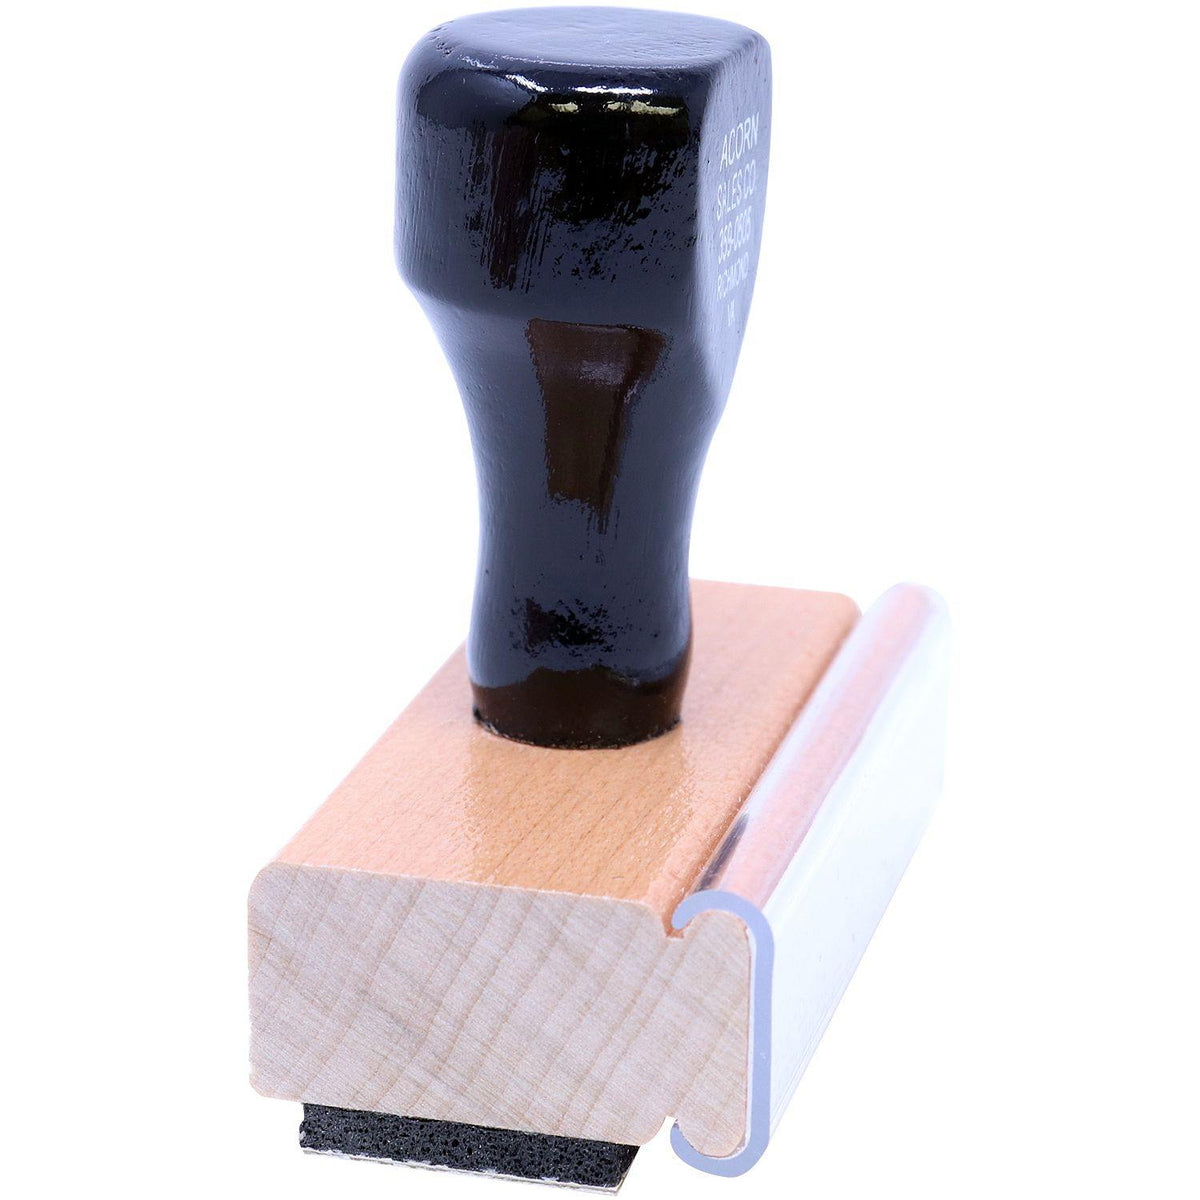 Side View of Large Bold Black Revised Rubber Stamp at an Angle